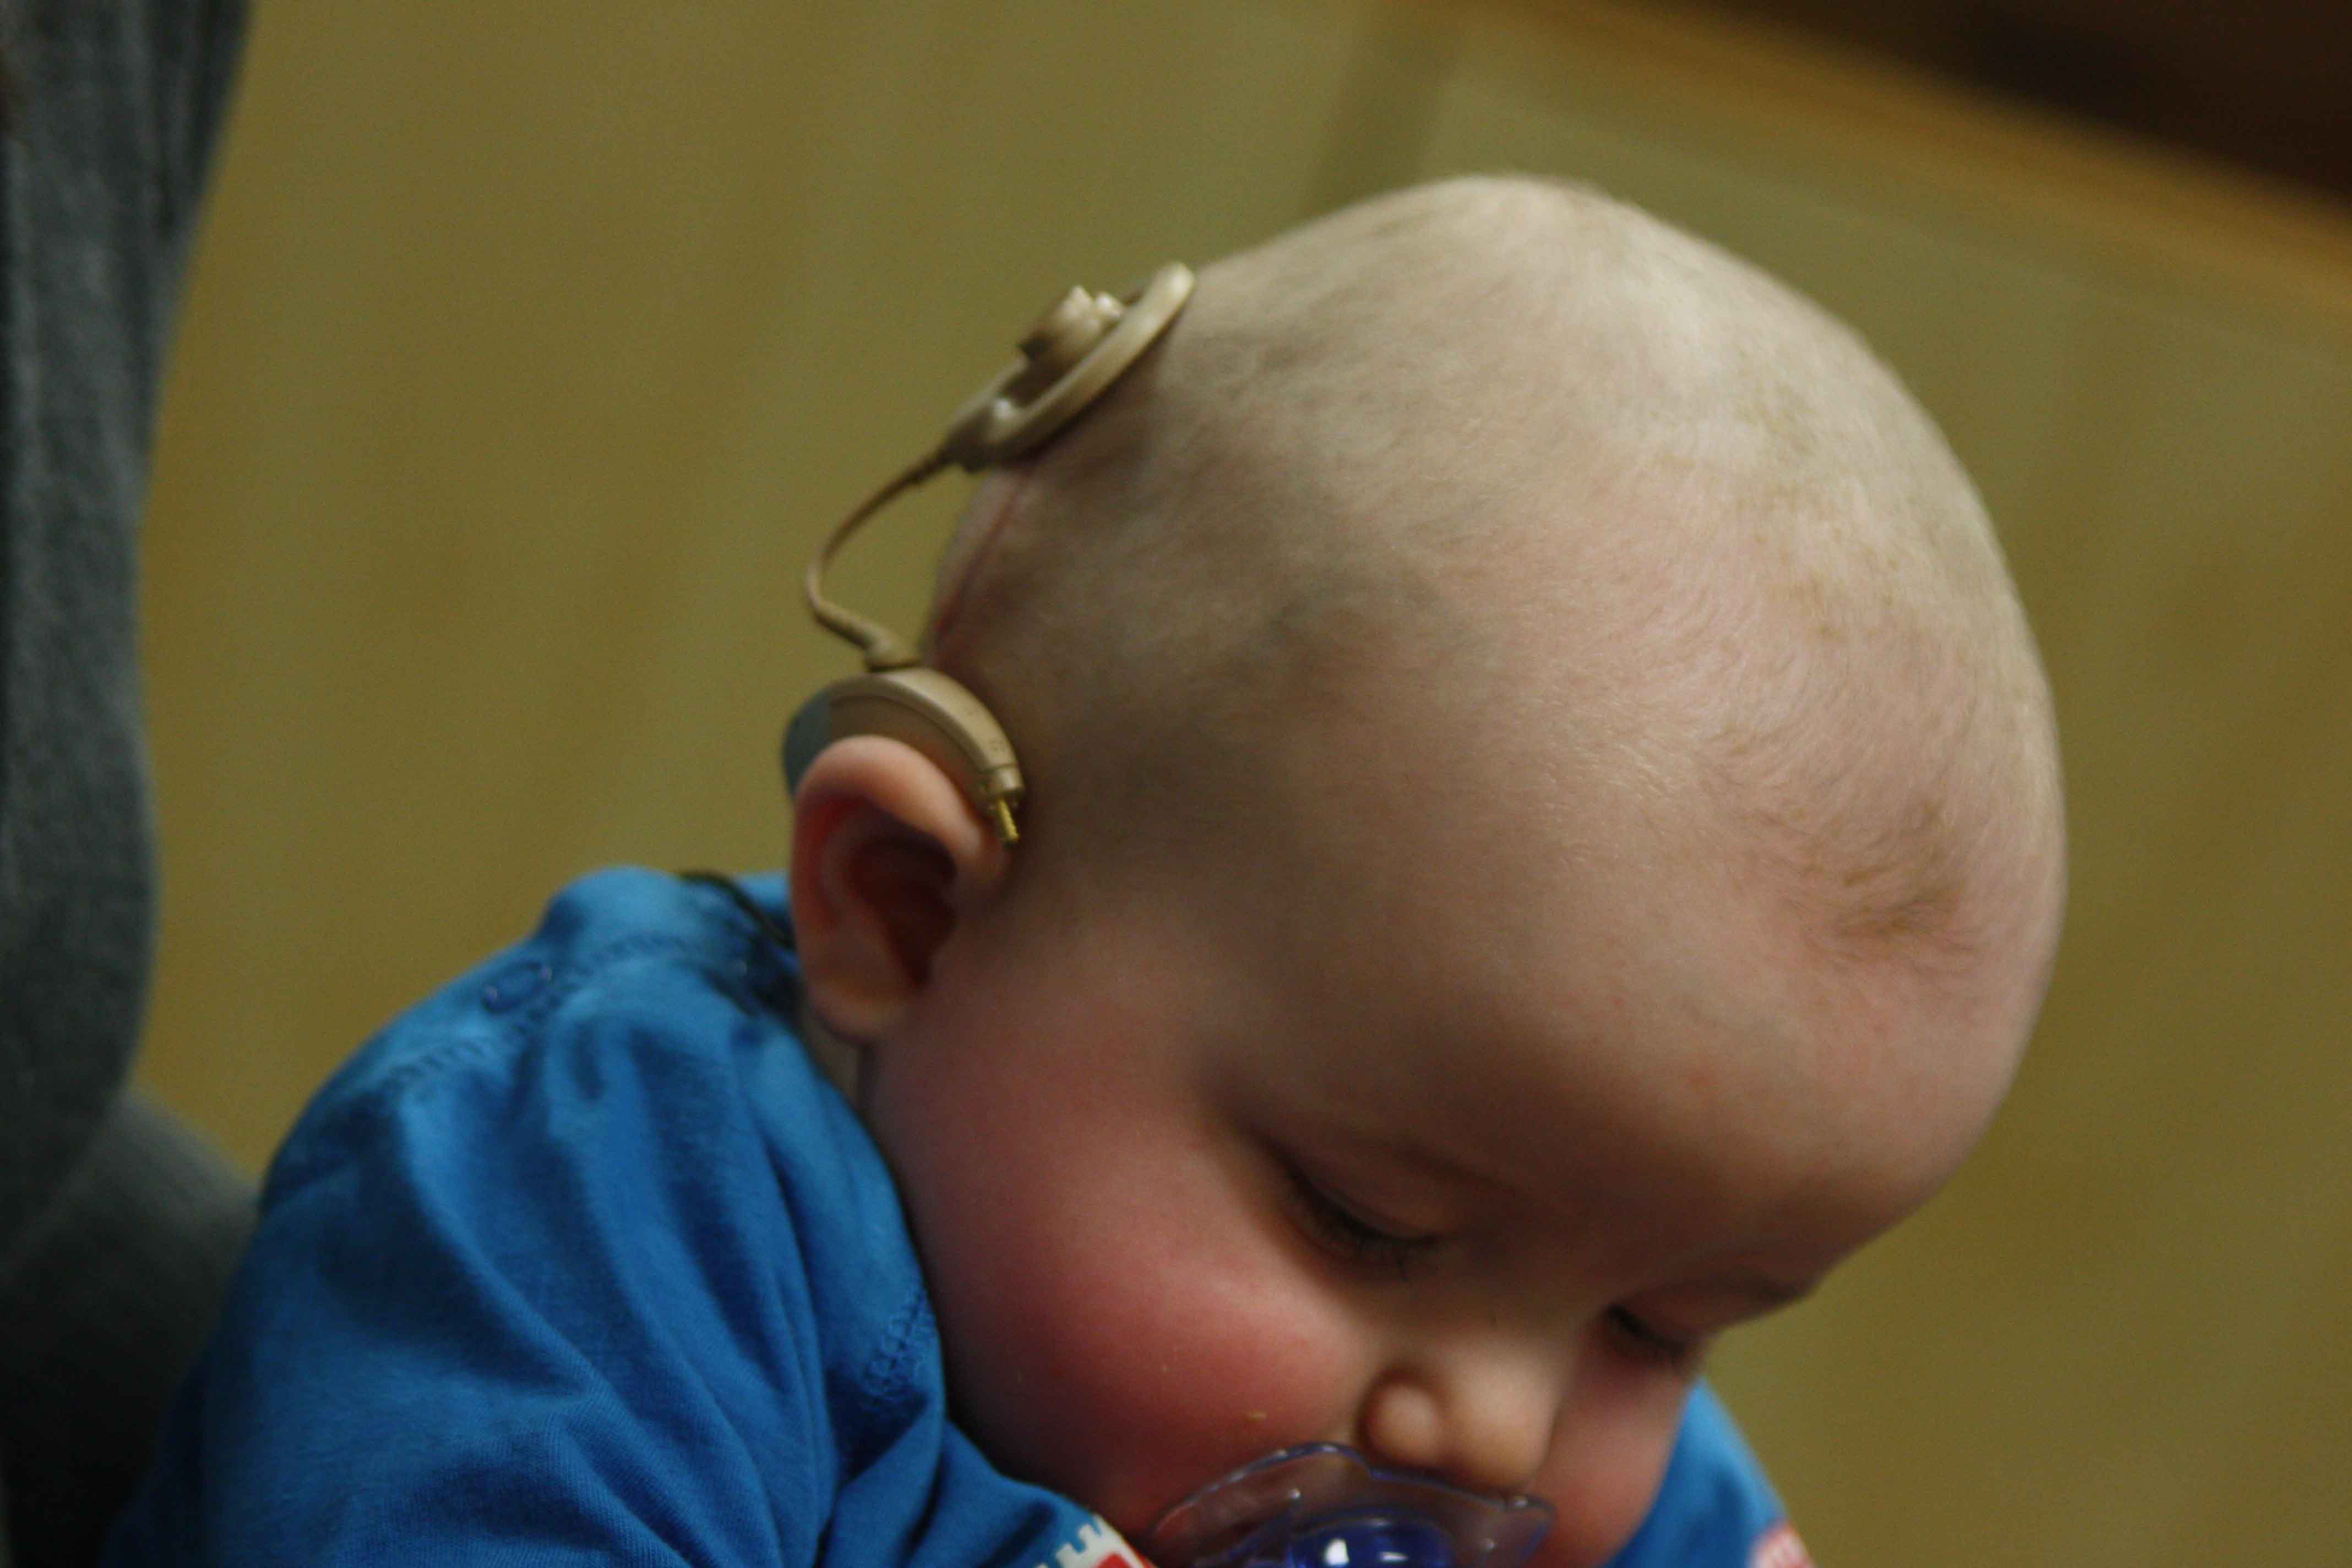 A Baby with A Cochlear Implant